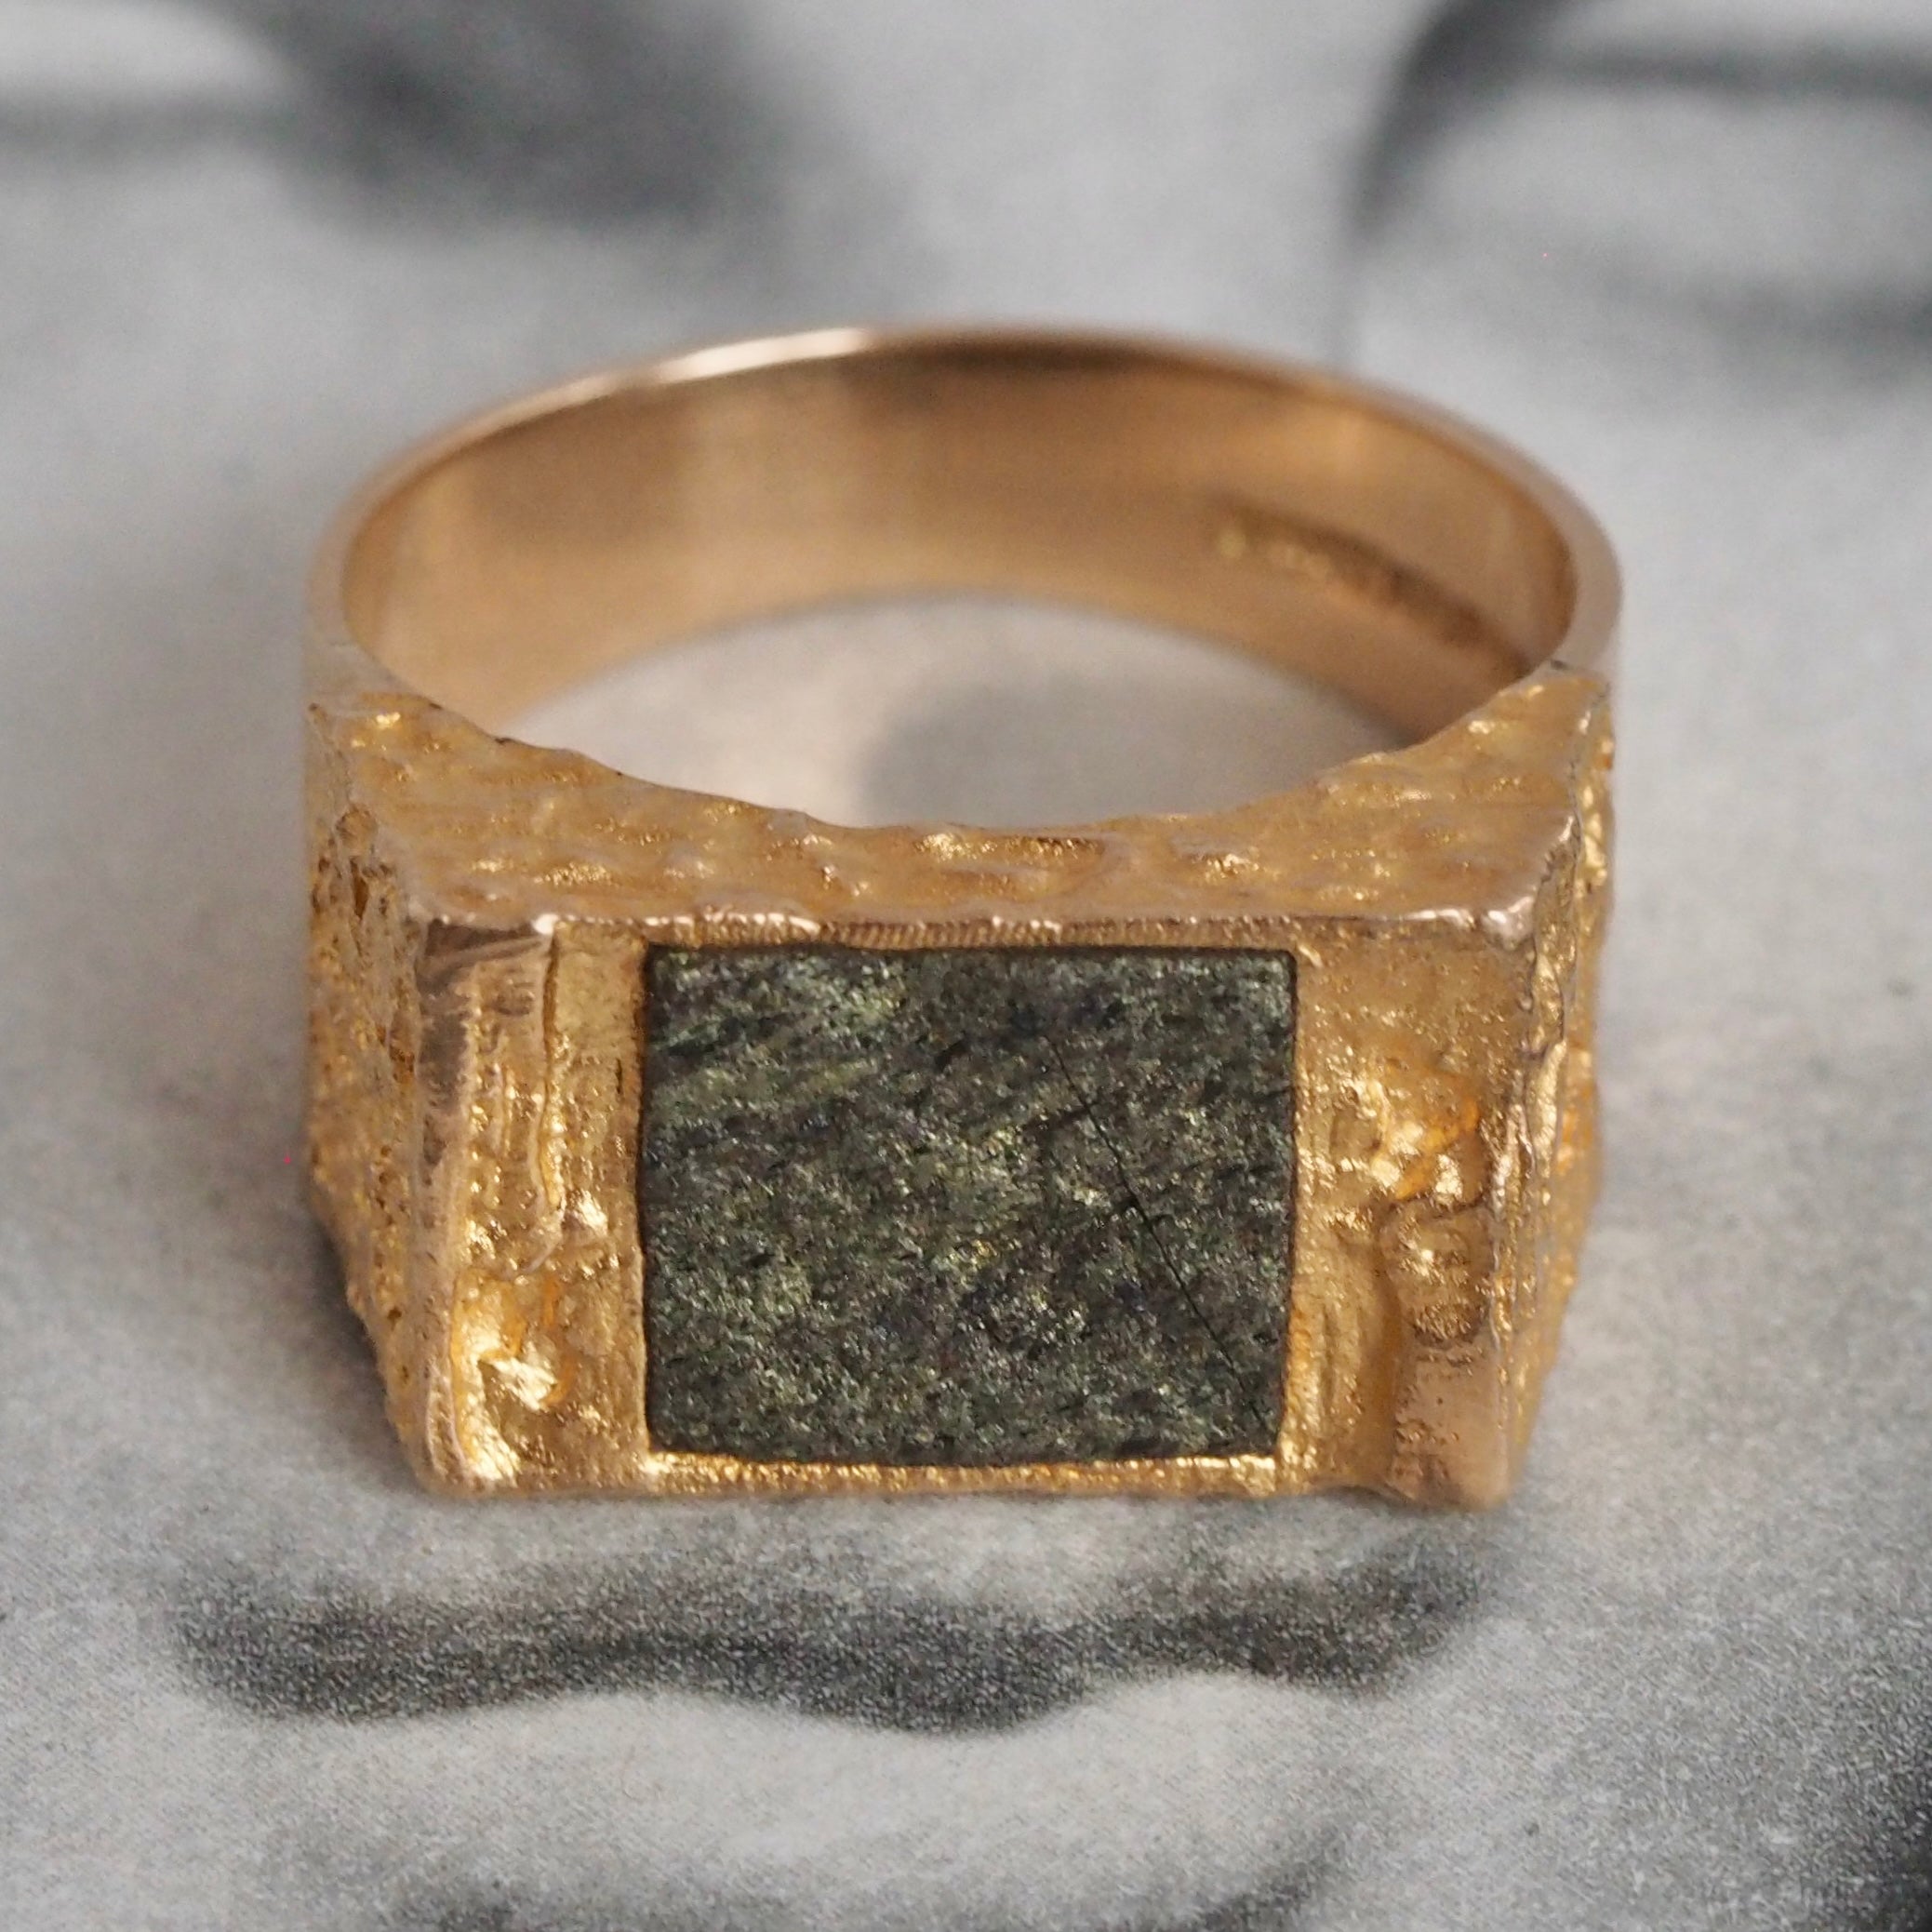 Vintage Modernist Pyrite and 14k Gold Ring by Björn Weckström for Lapponia